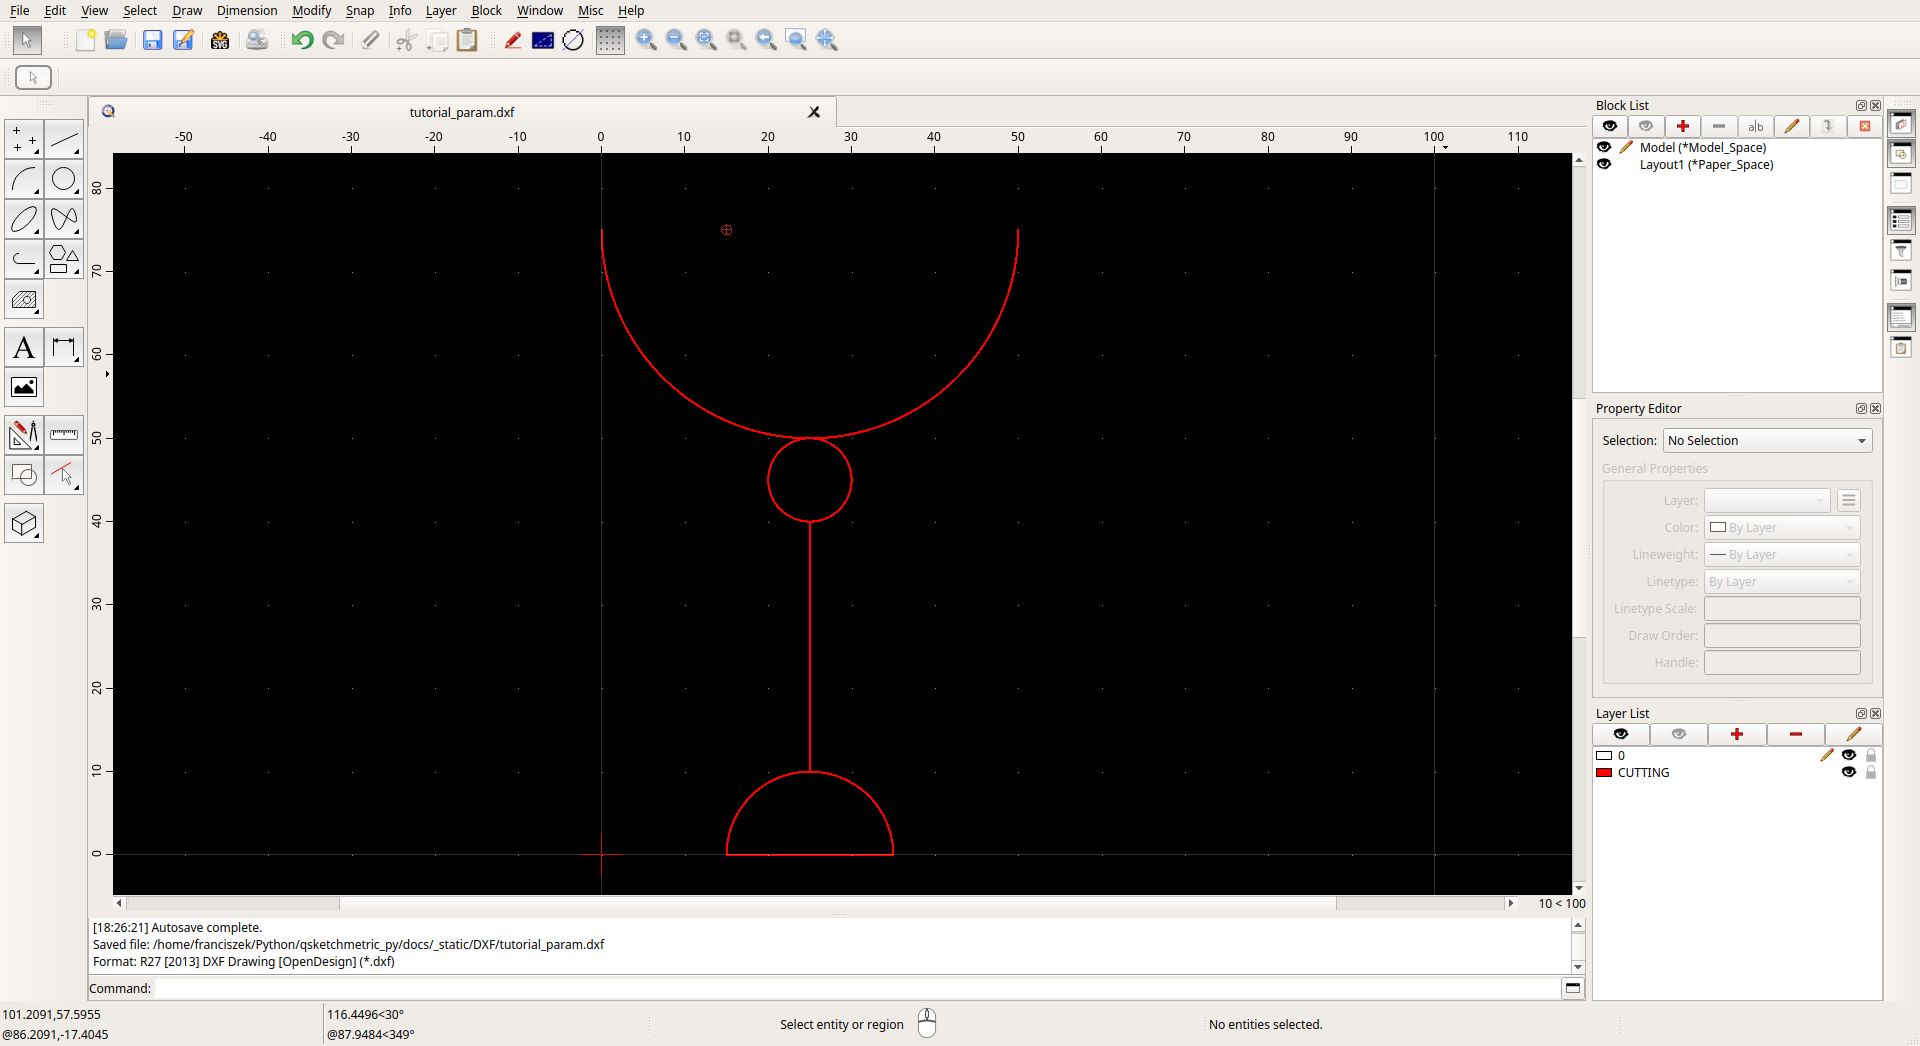 QCAD Professional with `tutorial_param.dxf` opened